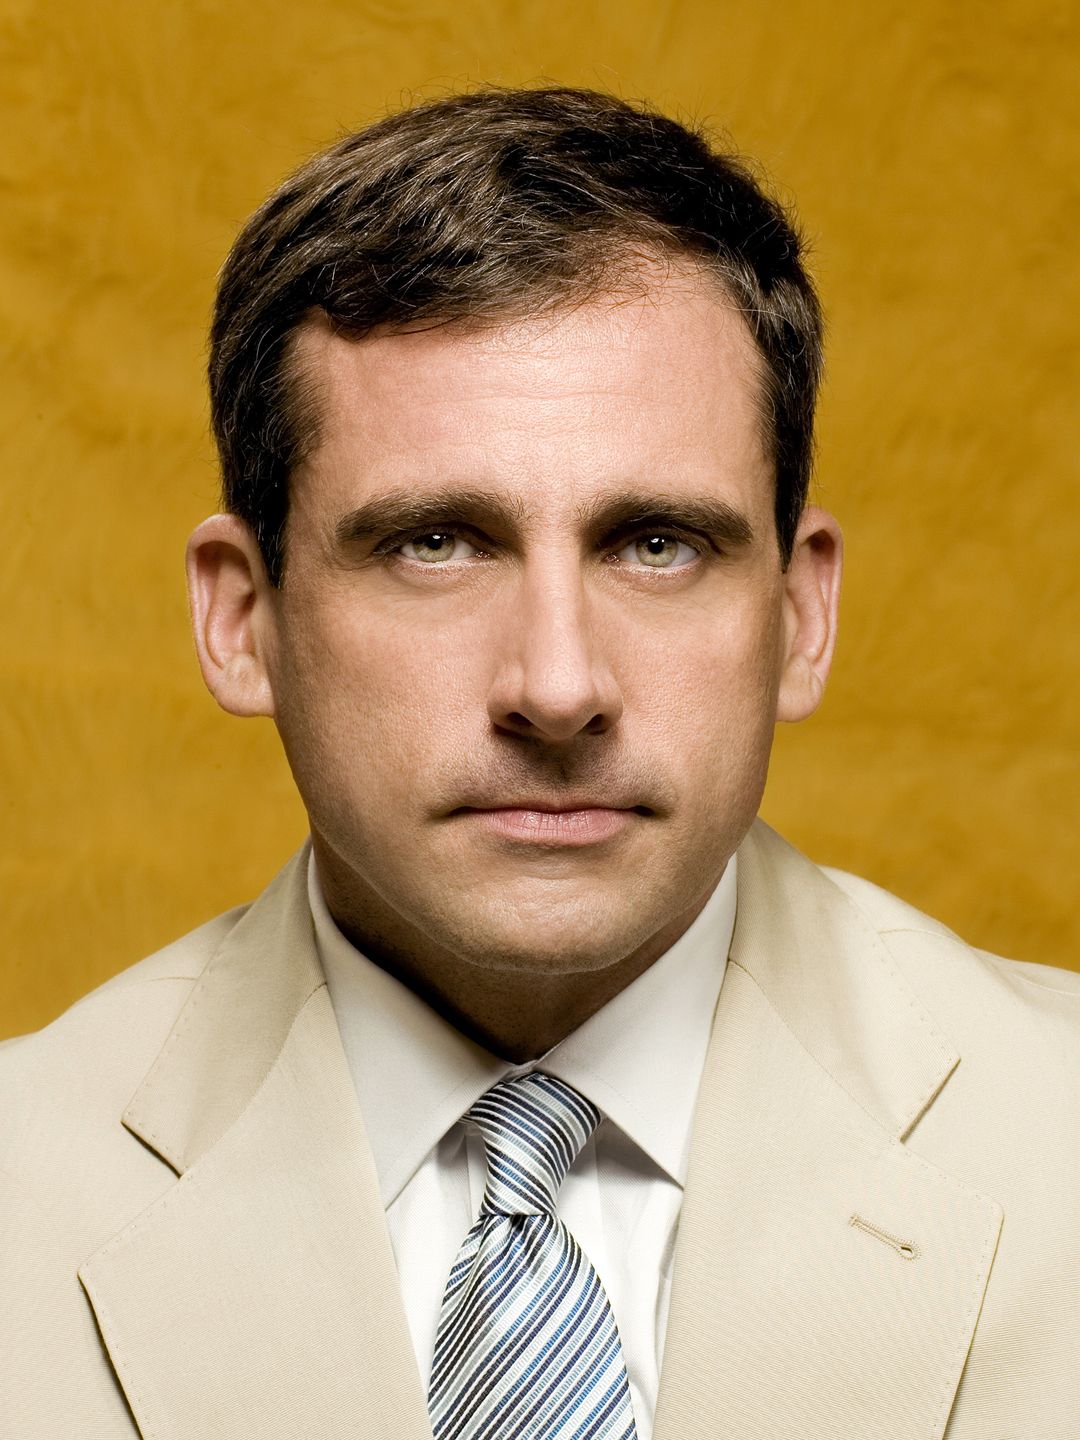 Steve Carell way to fame